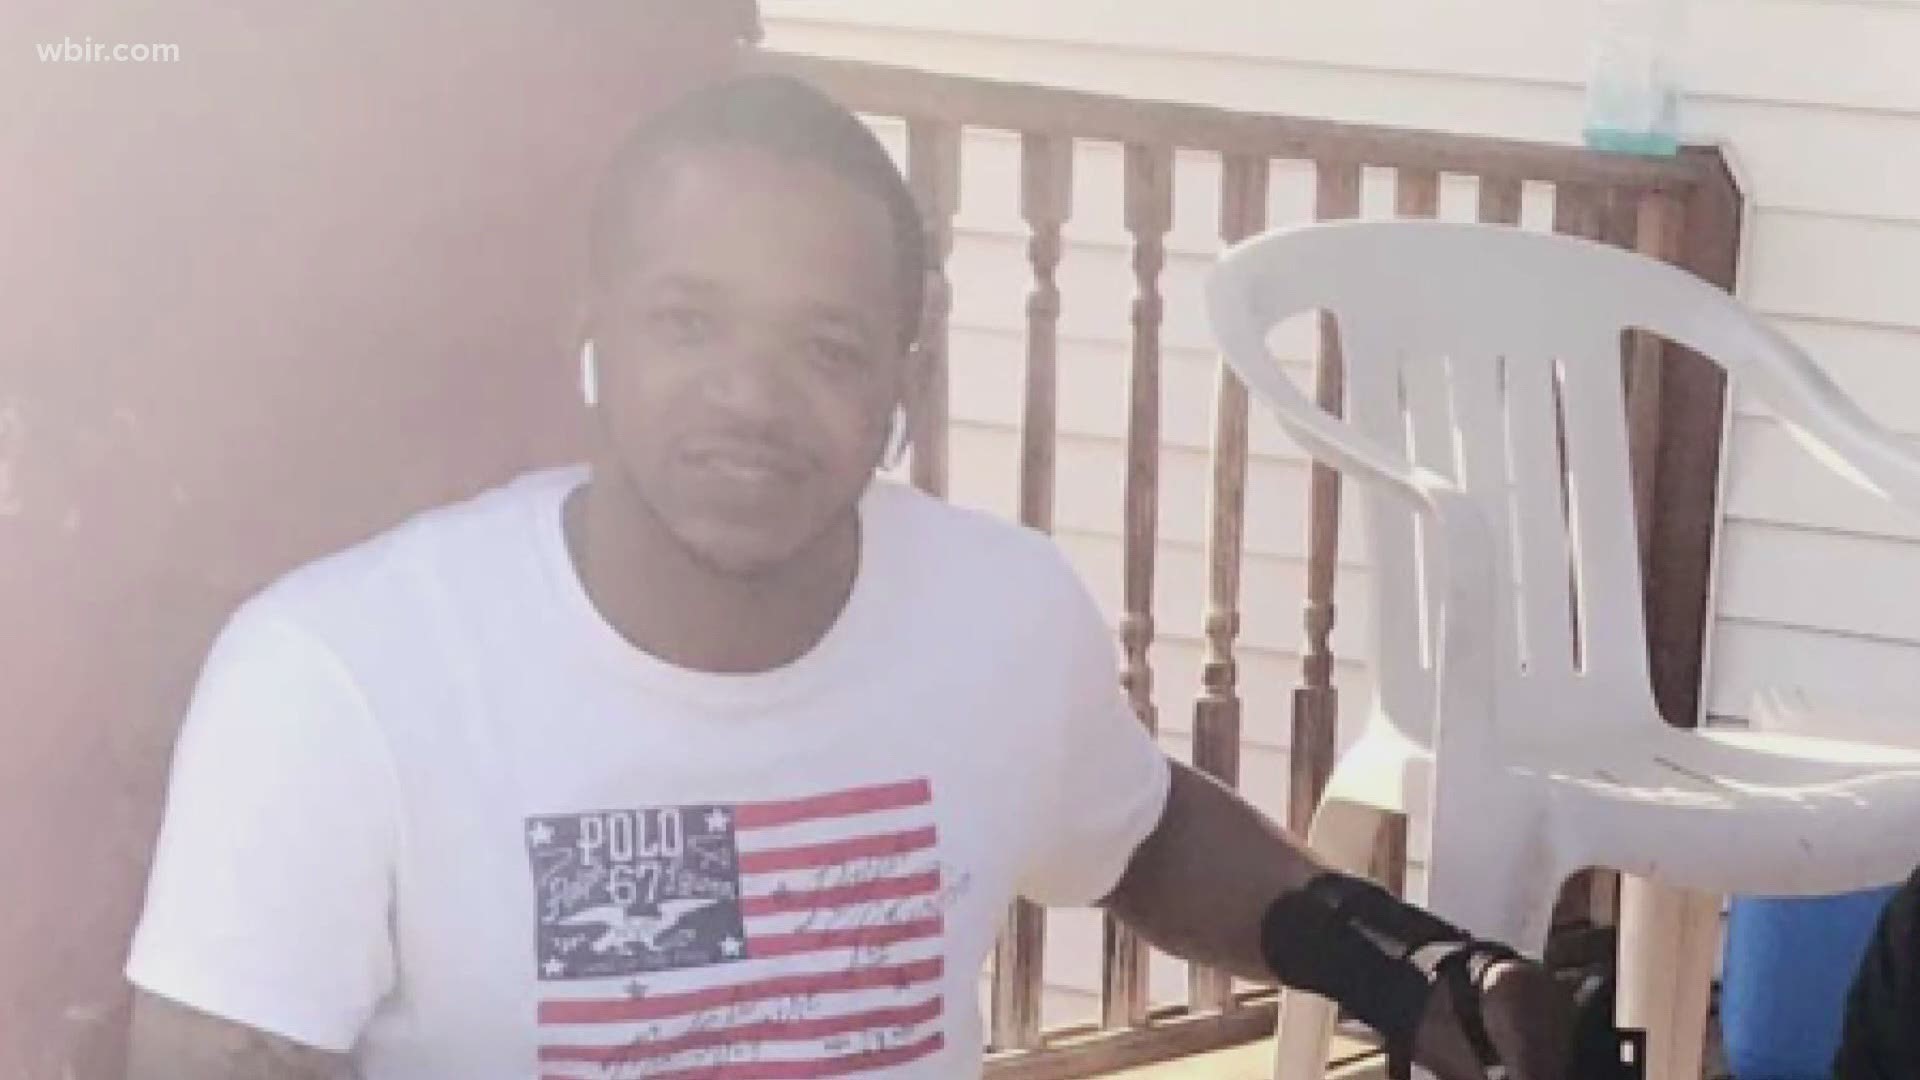 Darryl "DFlo" Florence died from a gunshot wound on Sunday. Days later, his family is asking the community to speak up.